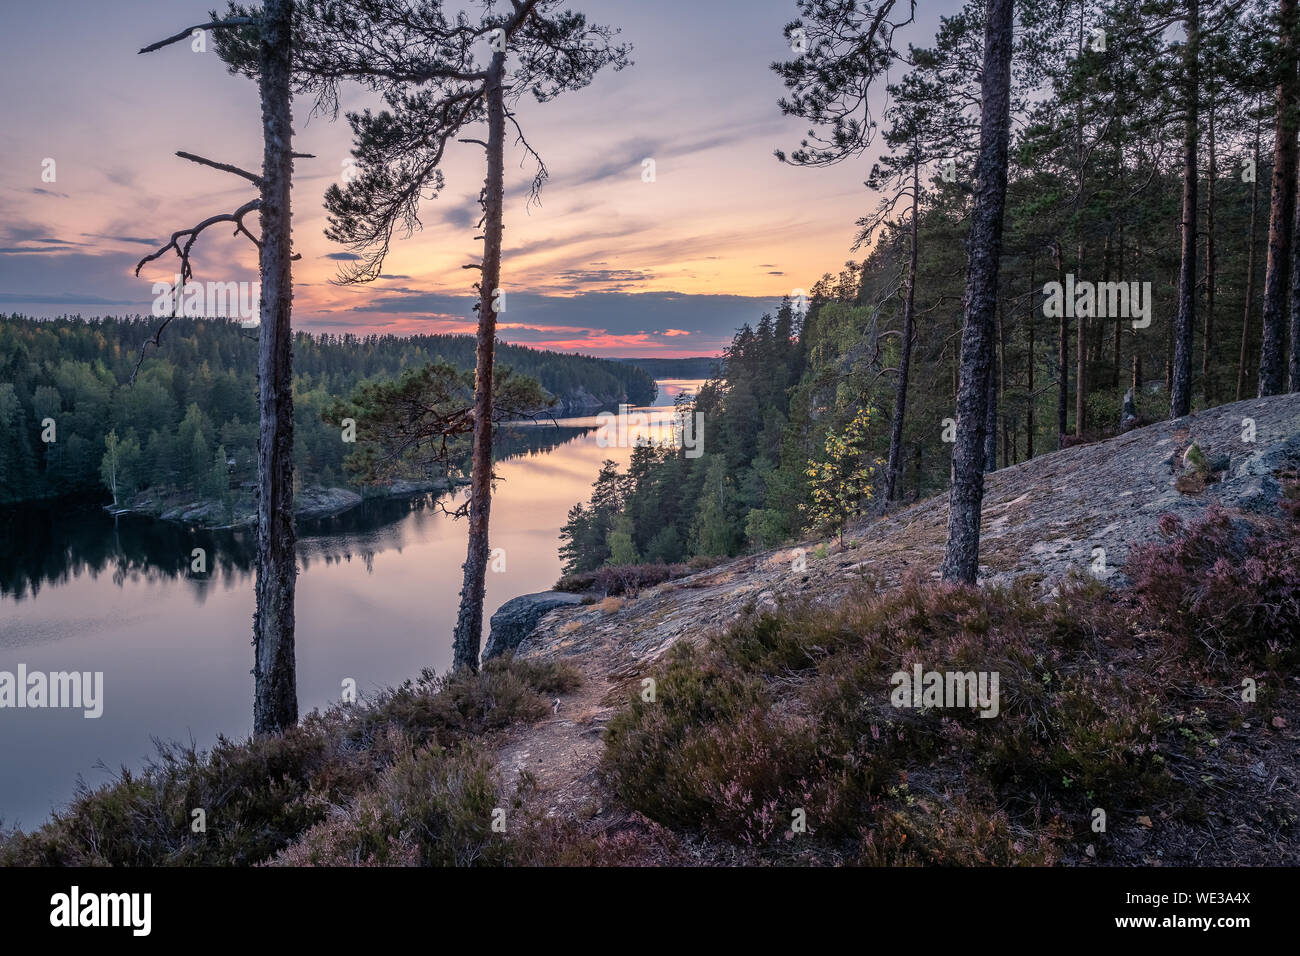 Scenic forest landscape with tarnquil mood and idyllic sunset at summer evening in Finland Stock Photo